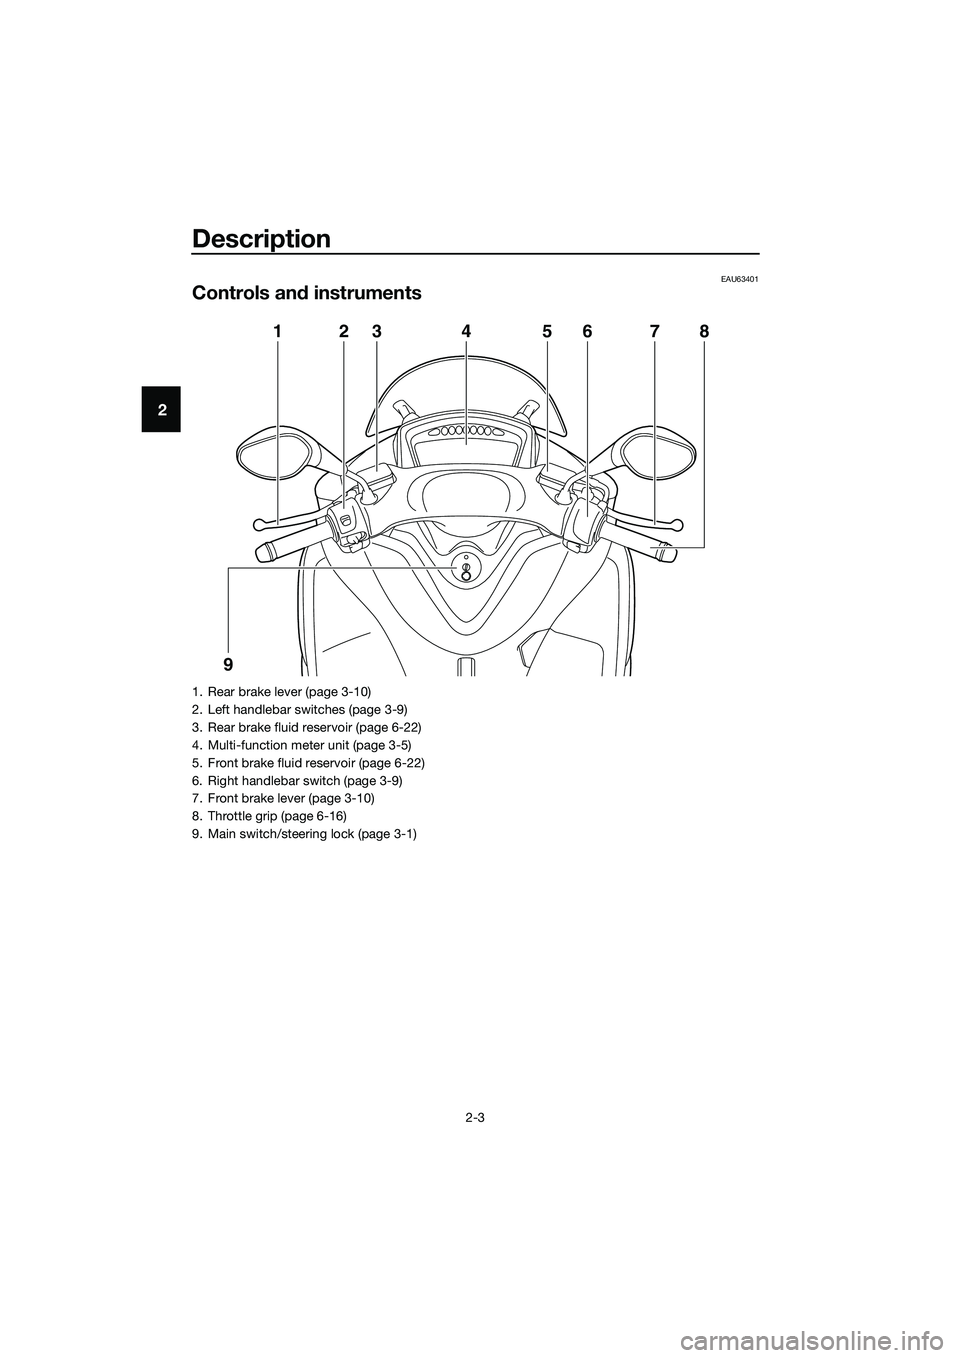 YAMAHA TRICITY 2017  Owners Manual Description
2-3
2
EAU63401
Controls and instruments
1
923 7 86 5 4
1. Rear brake lever (page 3-10)
2. Left handlebar switches (page 3-9)
3. Rear brake fluid reservoir (page 6-22)
4. Multi-function met